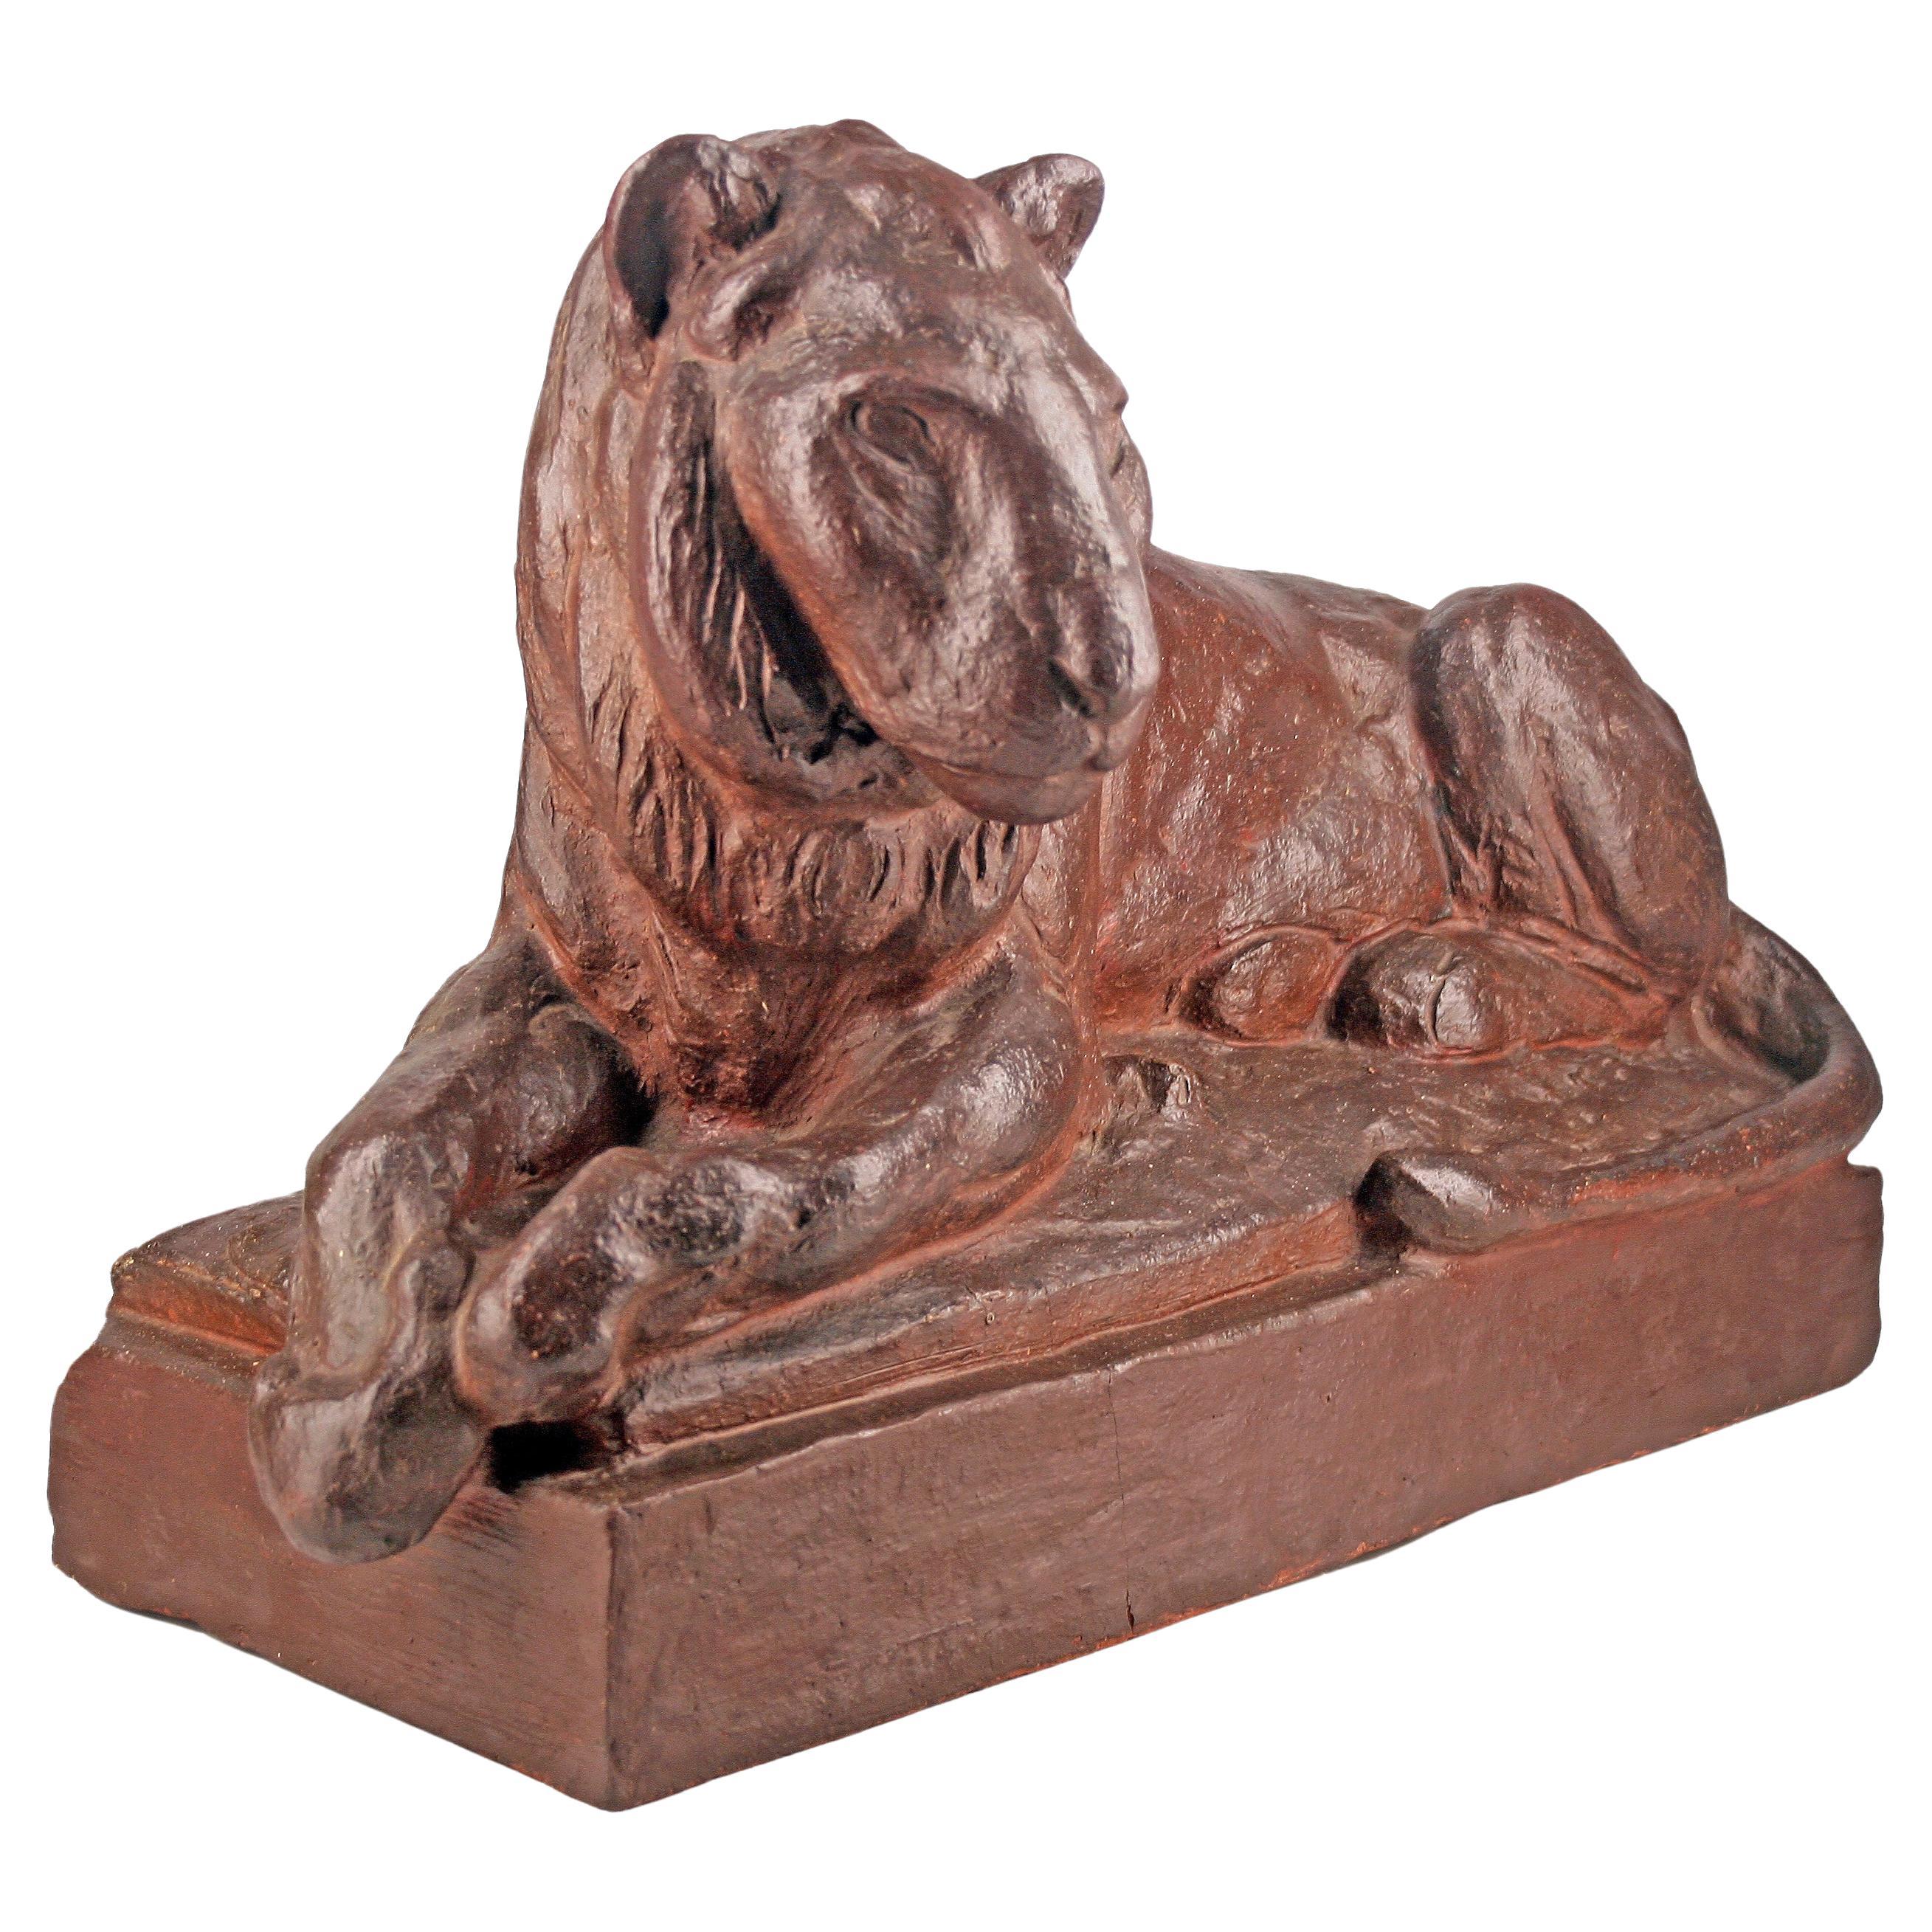 19th C. German Terracotta Sculpture of Resting Lion by Animalier Author A. Gaul